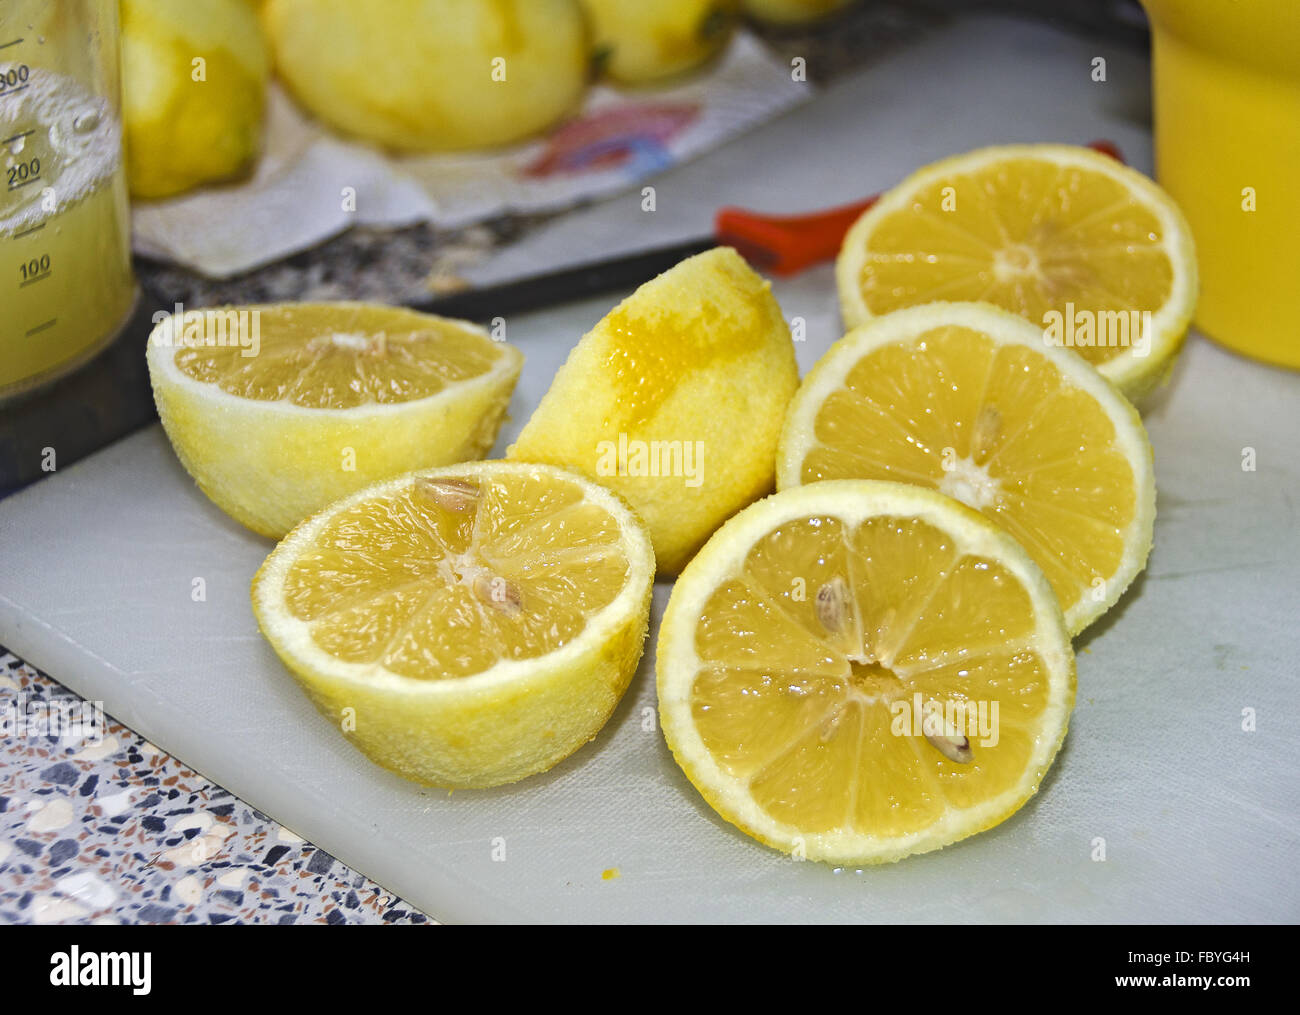 bisected and peeled lemons Stock Photo